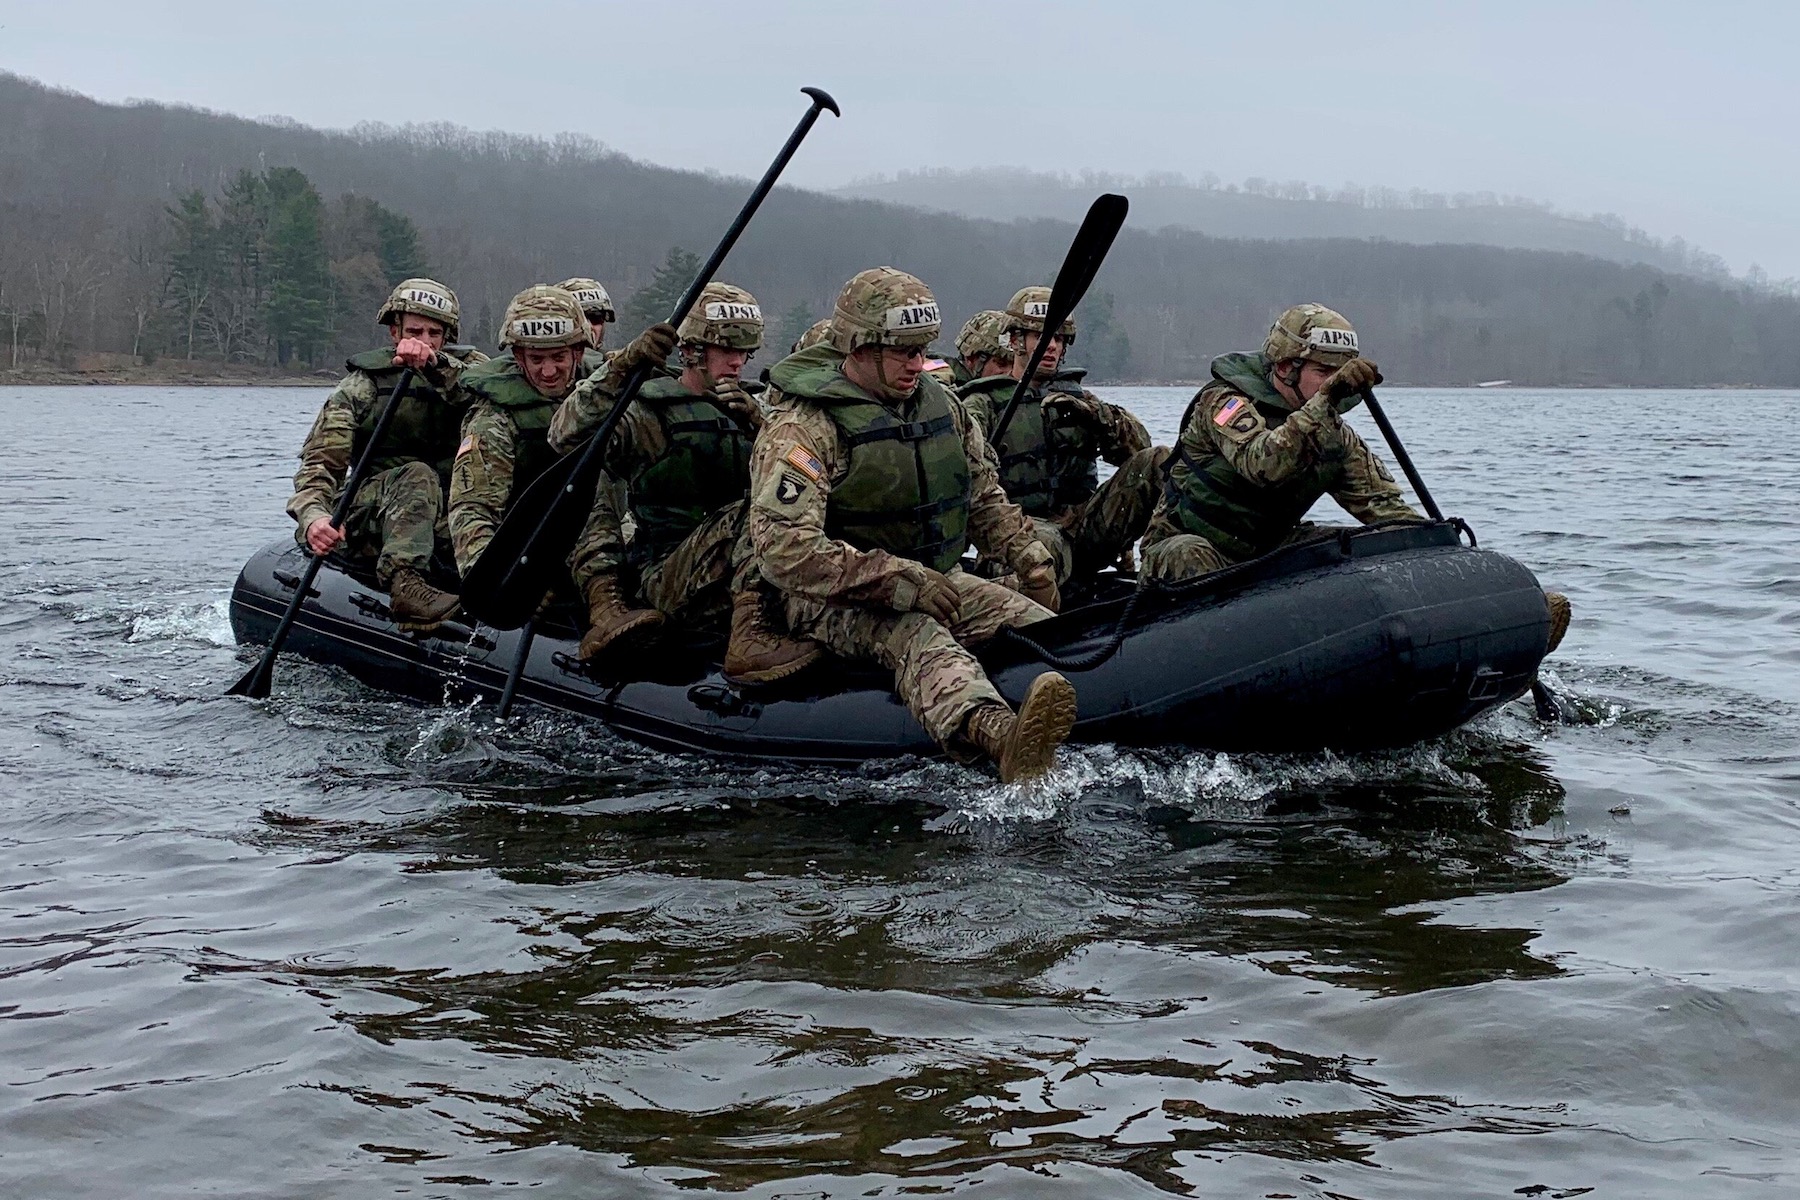 The Austin Peay ROTC Ranger Challenge team practices on a Zodiac boat at West Point, New York, ahead of the Sandhurst competition, which starts April 12.